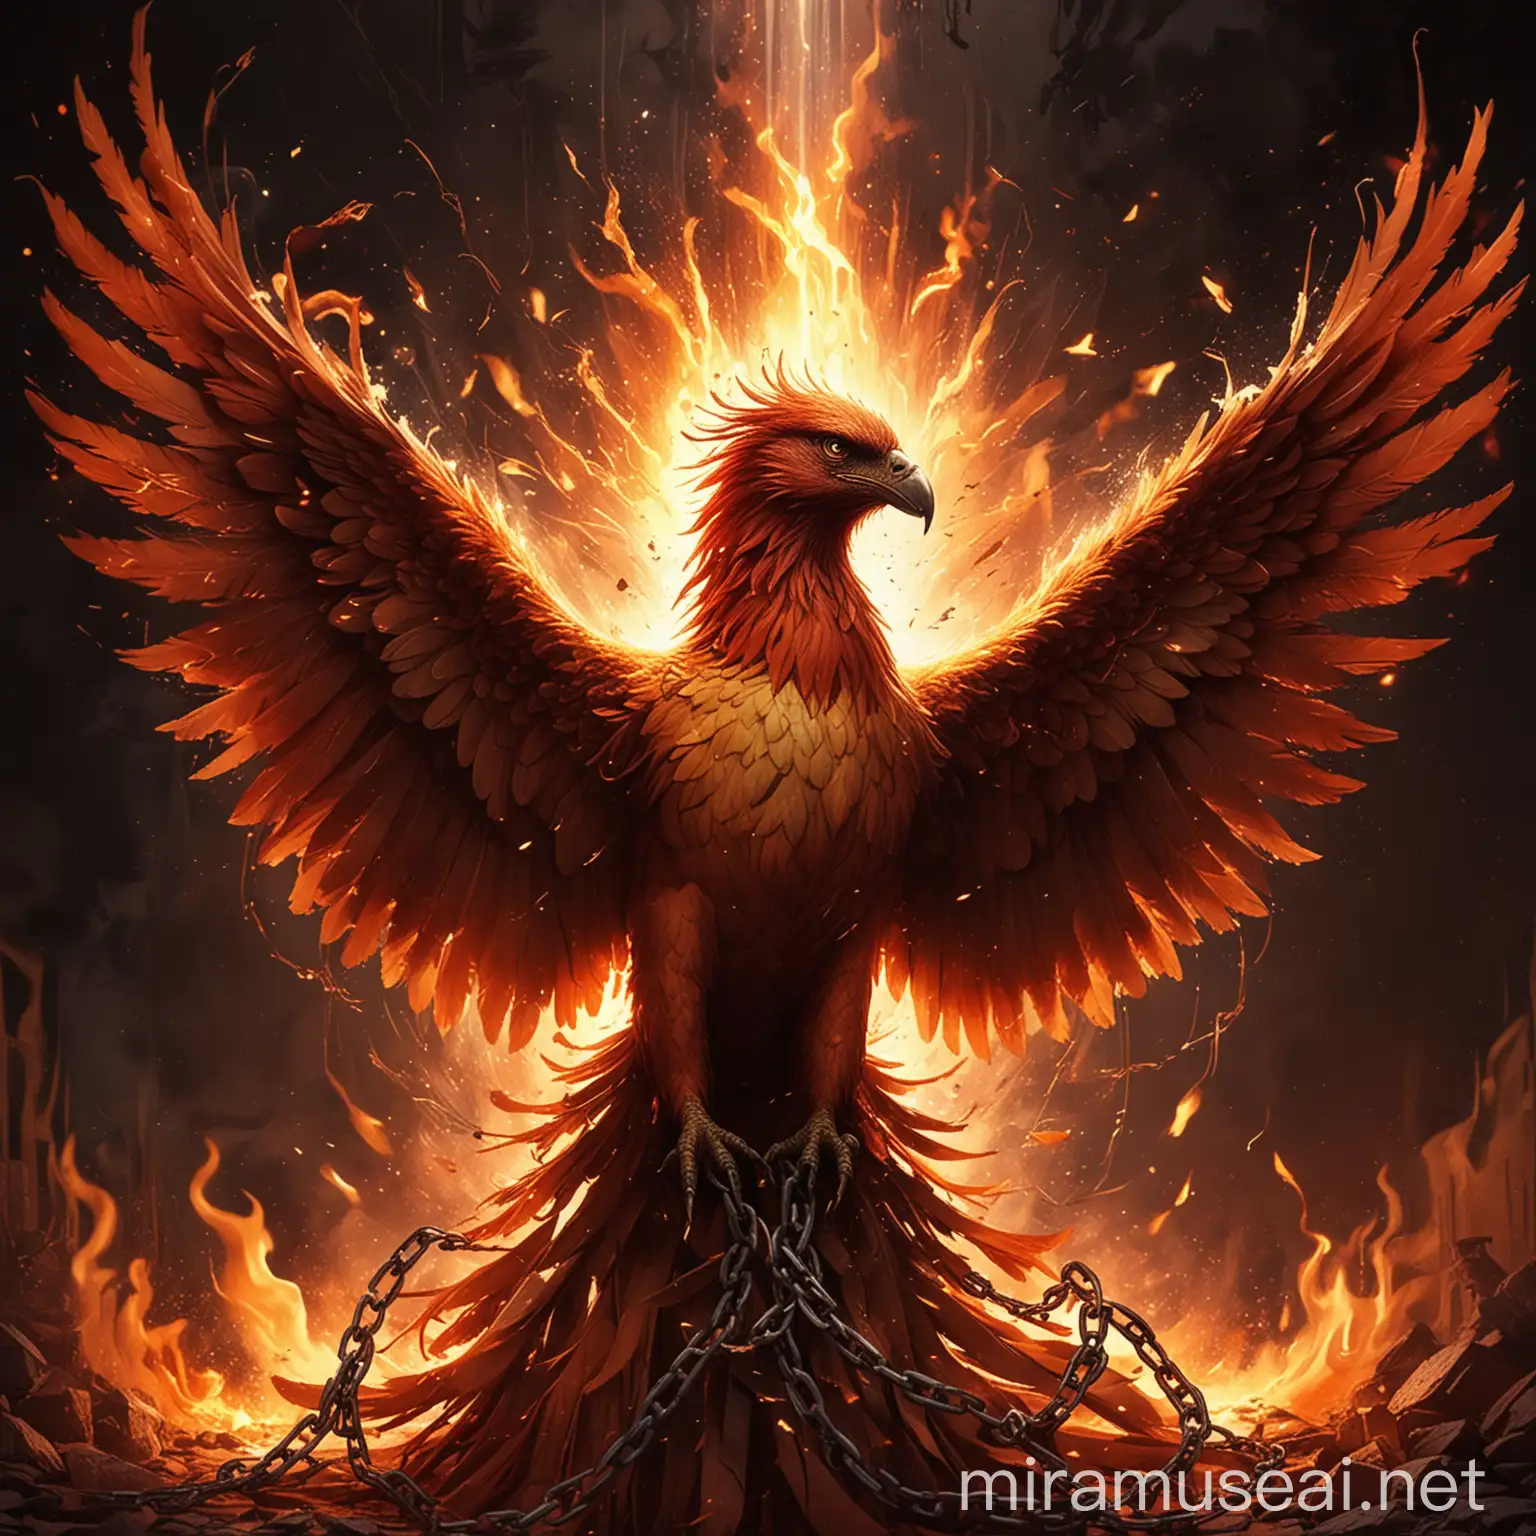 **Prompt for MidJourney:**

/imagine prompt: Create a powerful and emotionally evocative NFT artwork titled "Phoenix of Freedom". Depict a majestic phoenix breaking free from heavy, dark chains, symbolizing liberation from addiction. The phoenix should rise triumphantly, surrounded by bright, dynamic flames that symbolize rebirth and transformation. Ensure the phoenix’s feathers are meticulously detailed and radiant in colors of red, orange, and gold. The background should blend elements of darkness fading into light, representing hope and renewal. Highlight the breaking chains with sparks and fragments to emphasize the dramatic moment of liberation. Incorporate subtle symbols of addiction, such as shattered bottles or broken syringes, being left behind. Capture the emotional depth of the phoenix’s journey from bondage to freedom, evoking feelings of hope, resilience, and rebirth. The overall mood should be inspirational and uplifting. --v 5 --ar 16:9 --q 2 --style cinematic --no text